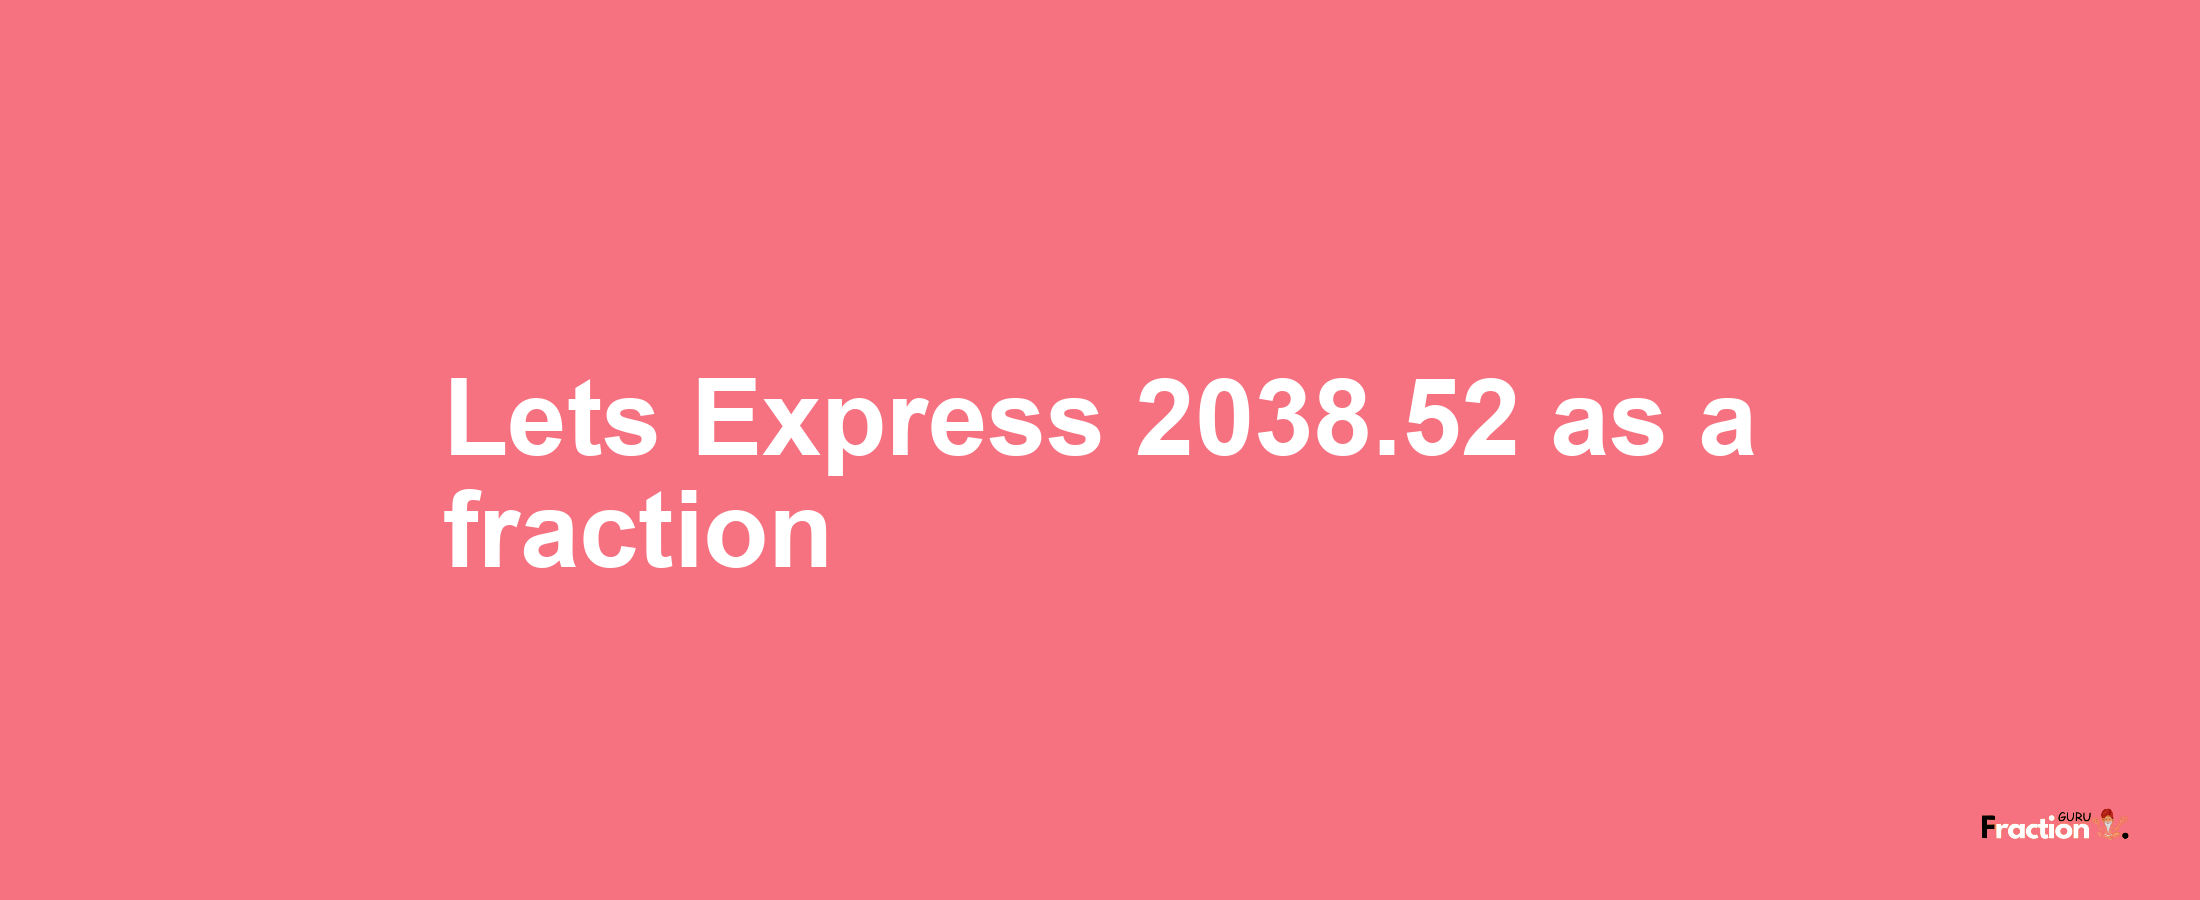 Lets Express 2038.52 as afraction